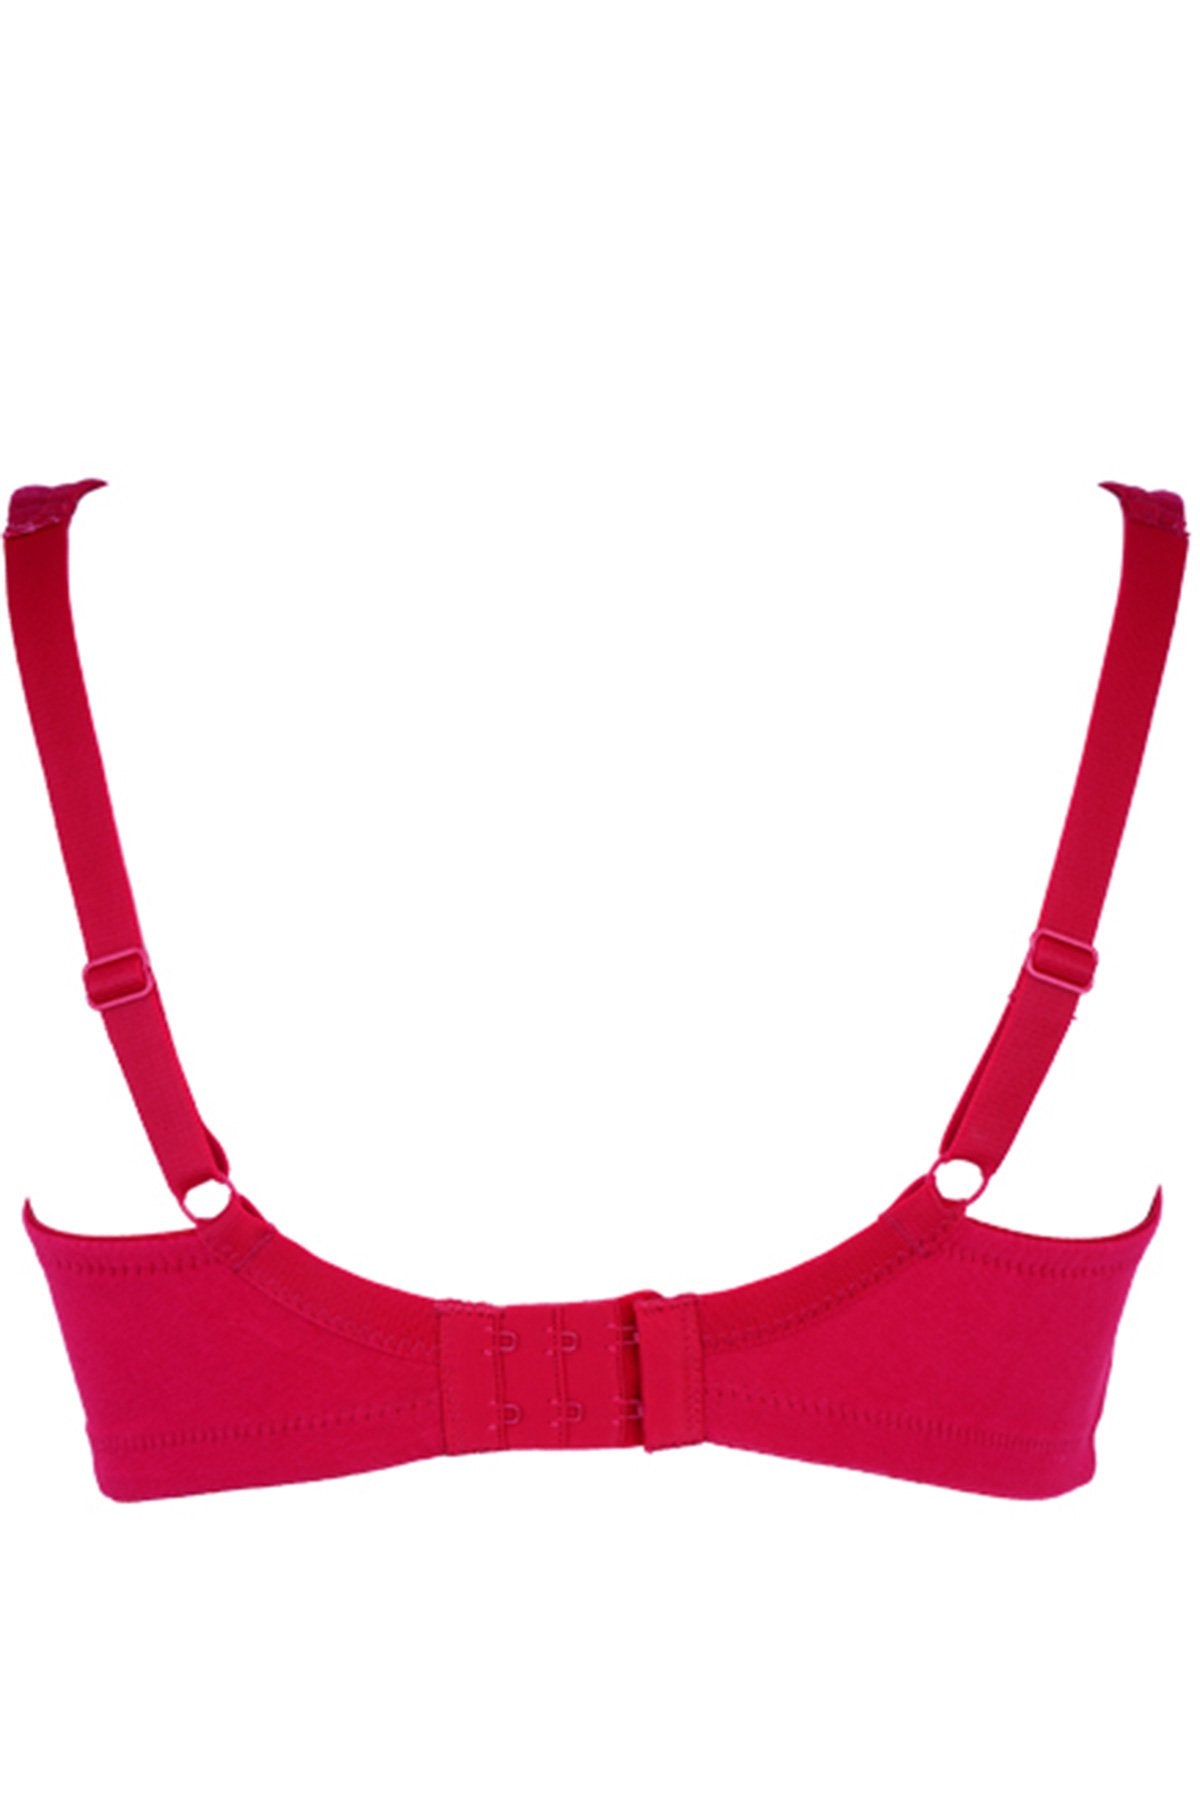 BLS - Cece Non Wired And Non Padded Cotton Bra - Burgundy